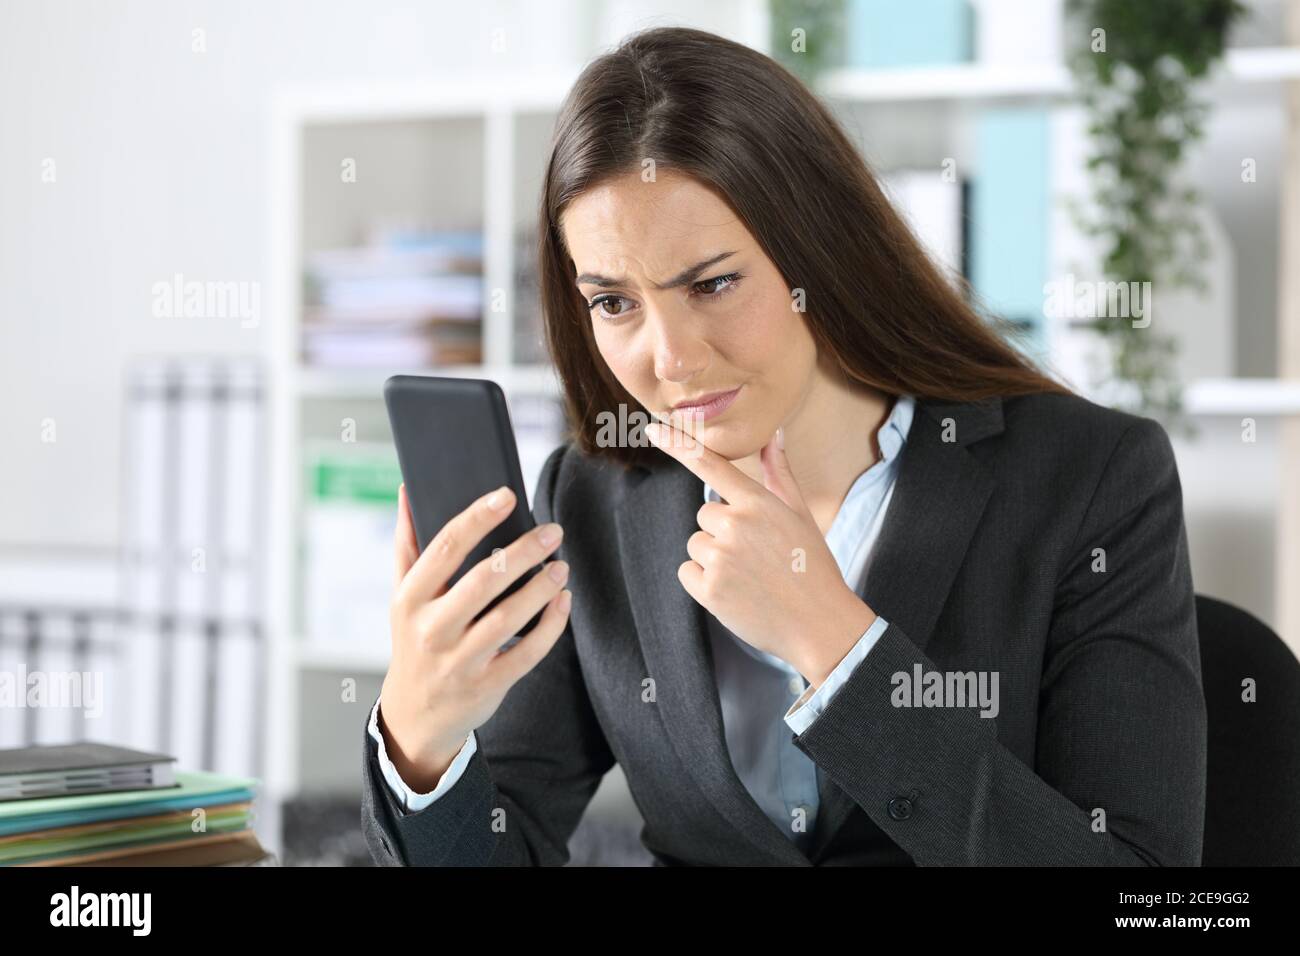 Suspicious executive woman checking smart phone sitting on a desk at the office Stock Photo